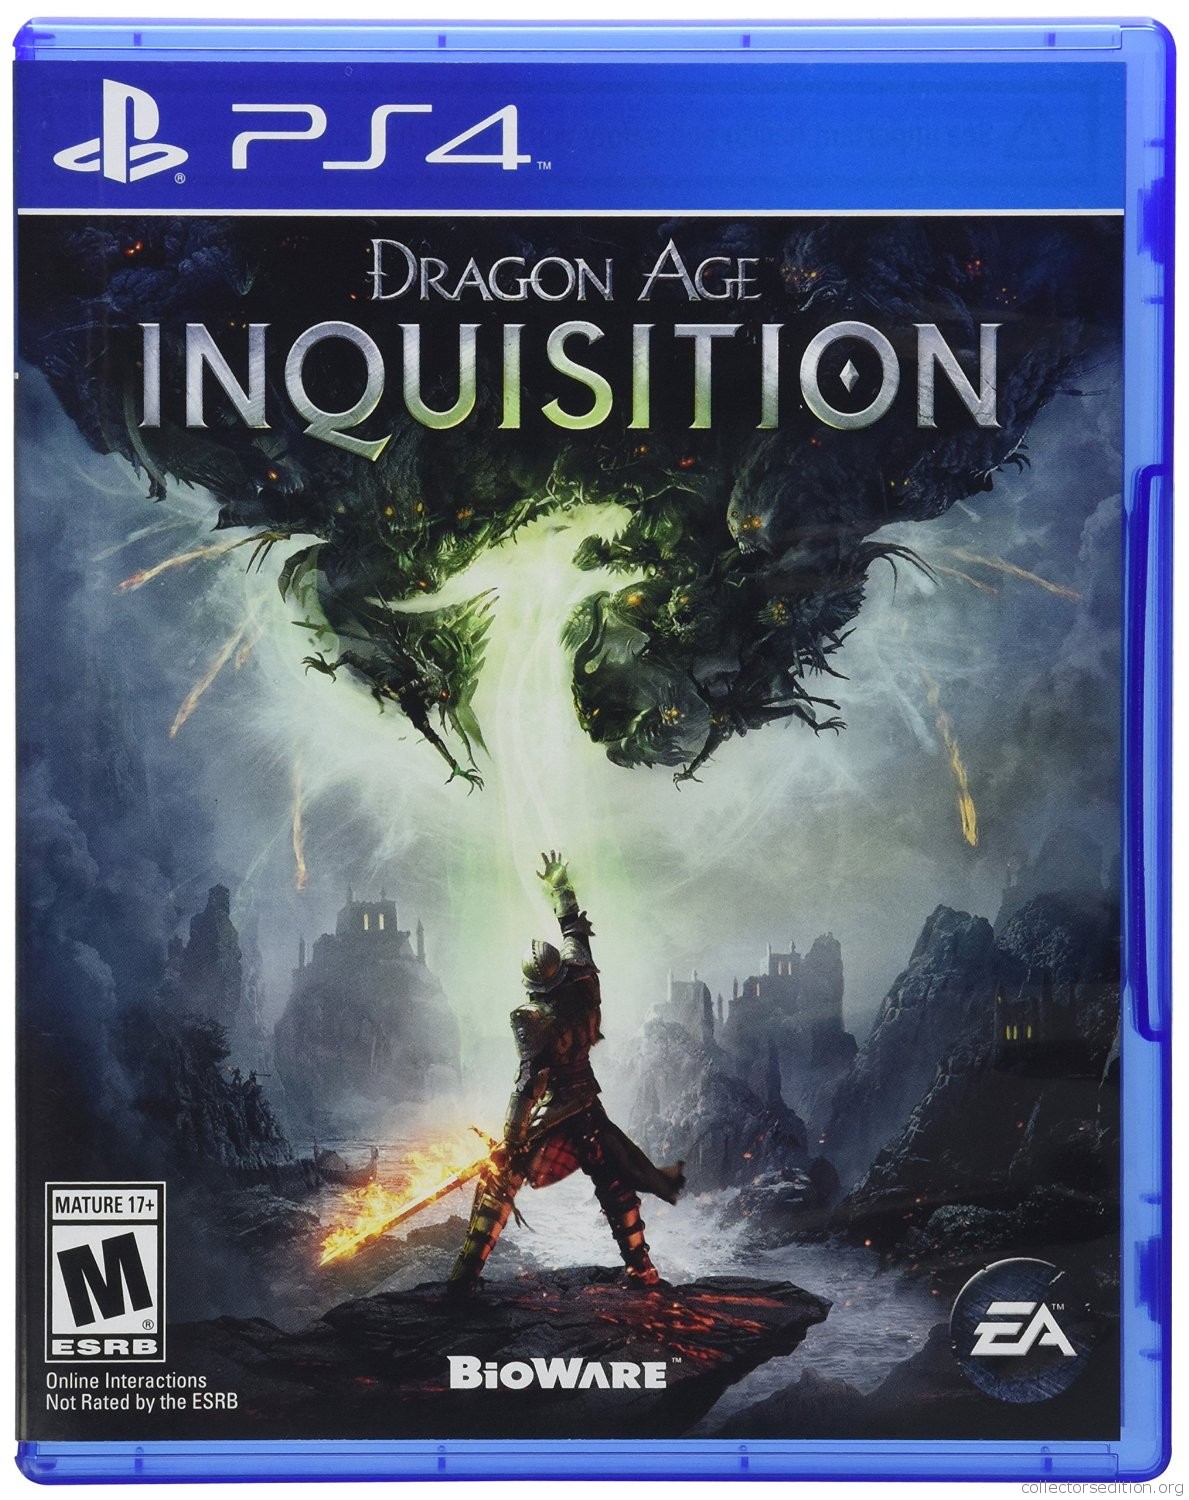 Dragon Age: Inquisition Review - GameSpot